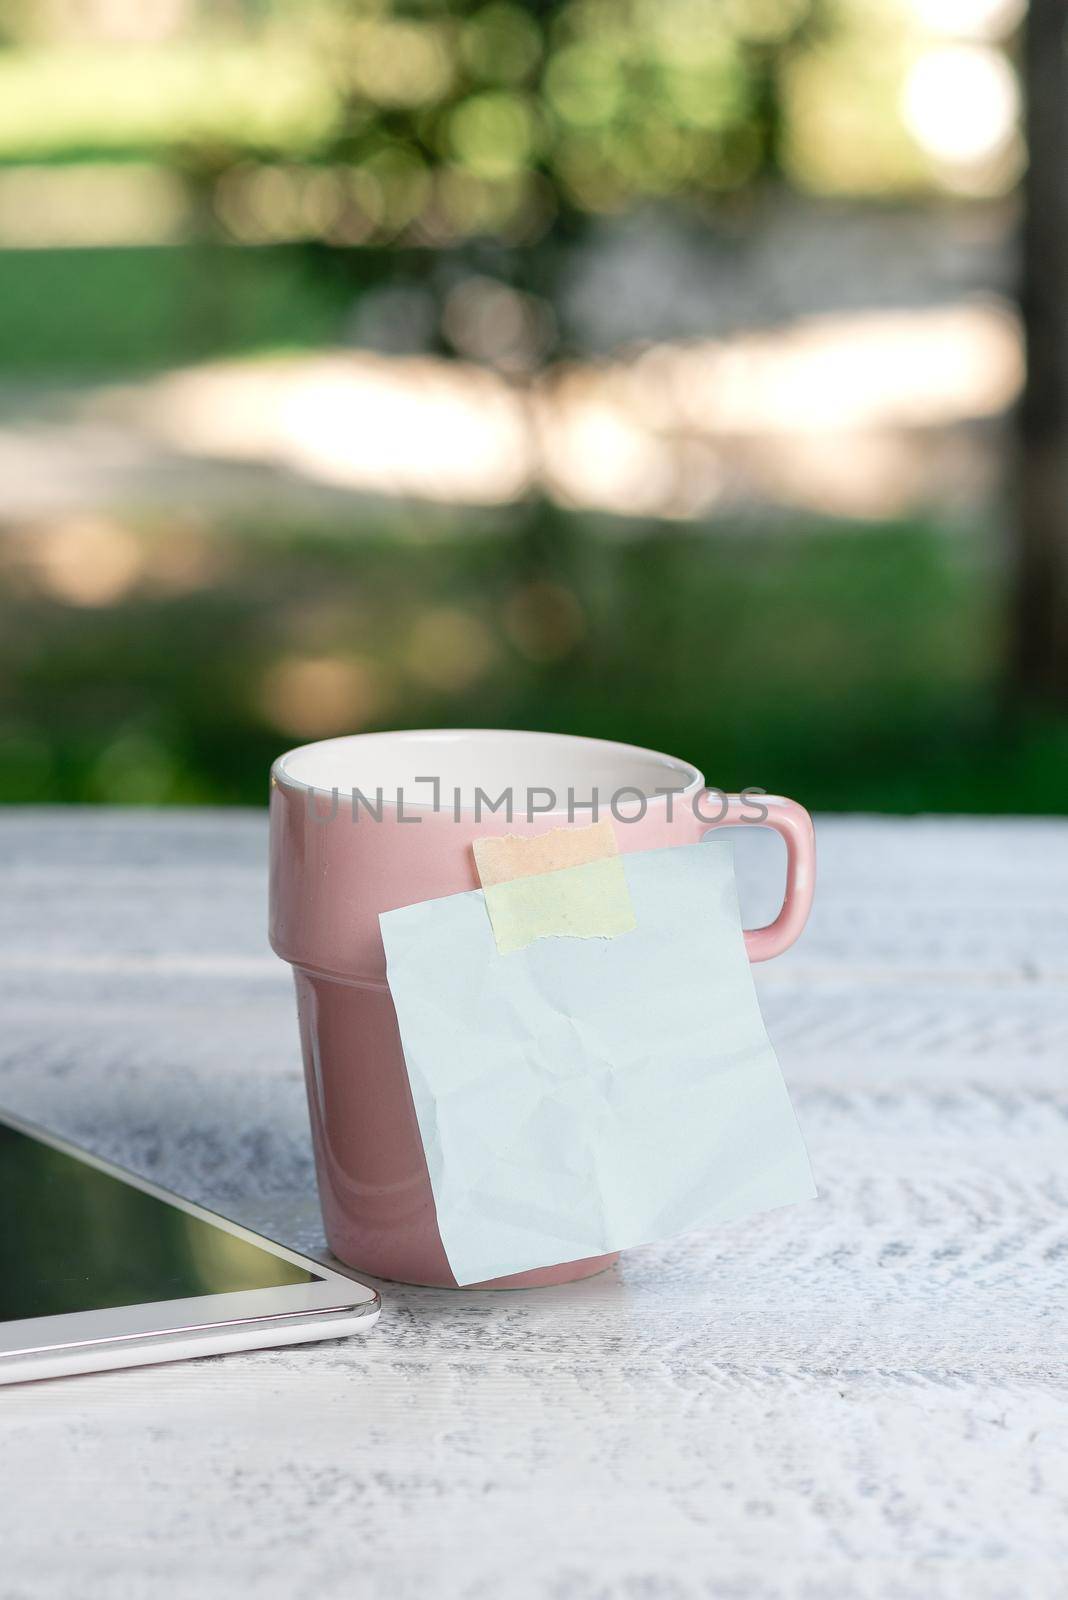 Calming Refreshing Environment, Garden Coffee Shop Ideas, Outdoor Relaxation Experience, Embracing Nature, Warm Climate, Workspace Outside, Writing Important Notes by nialowwa